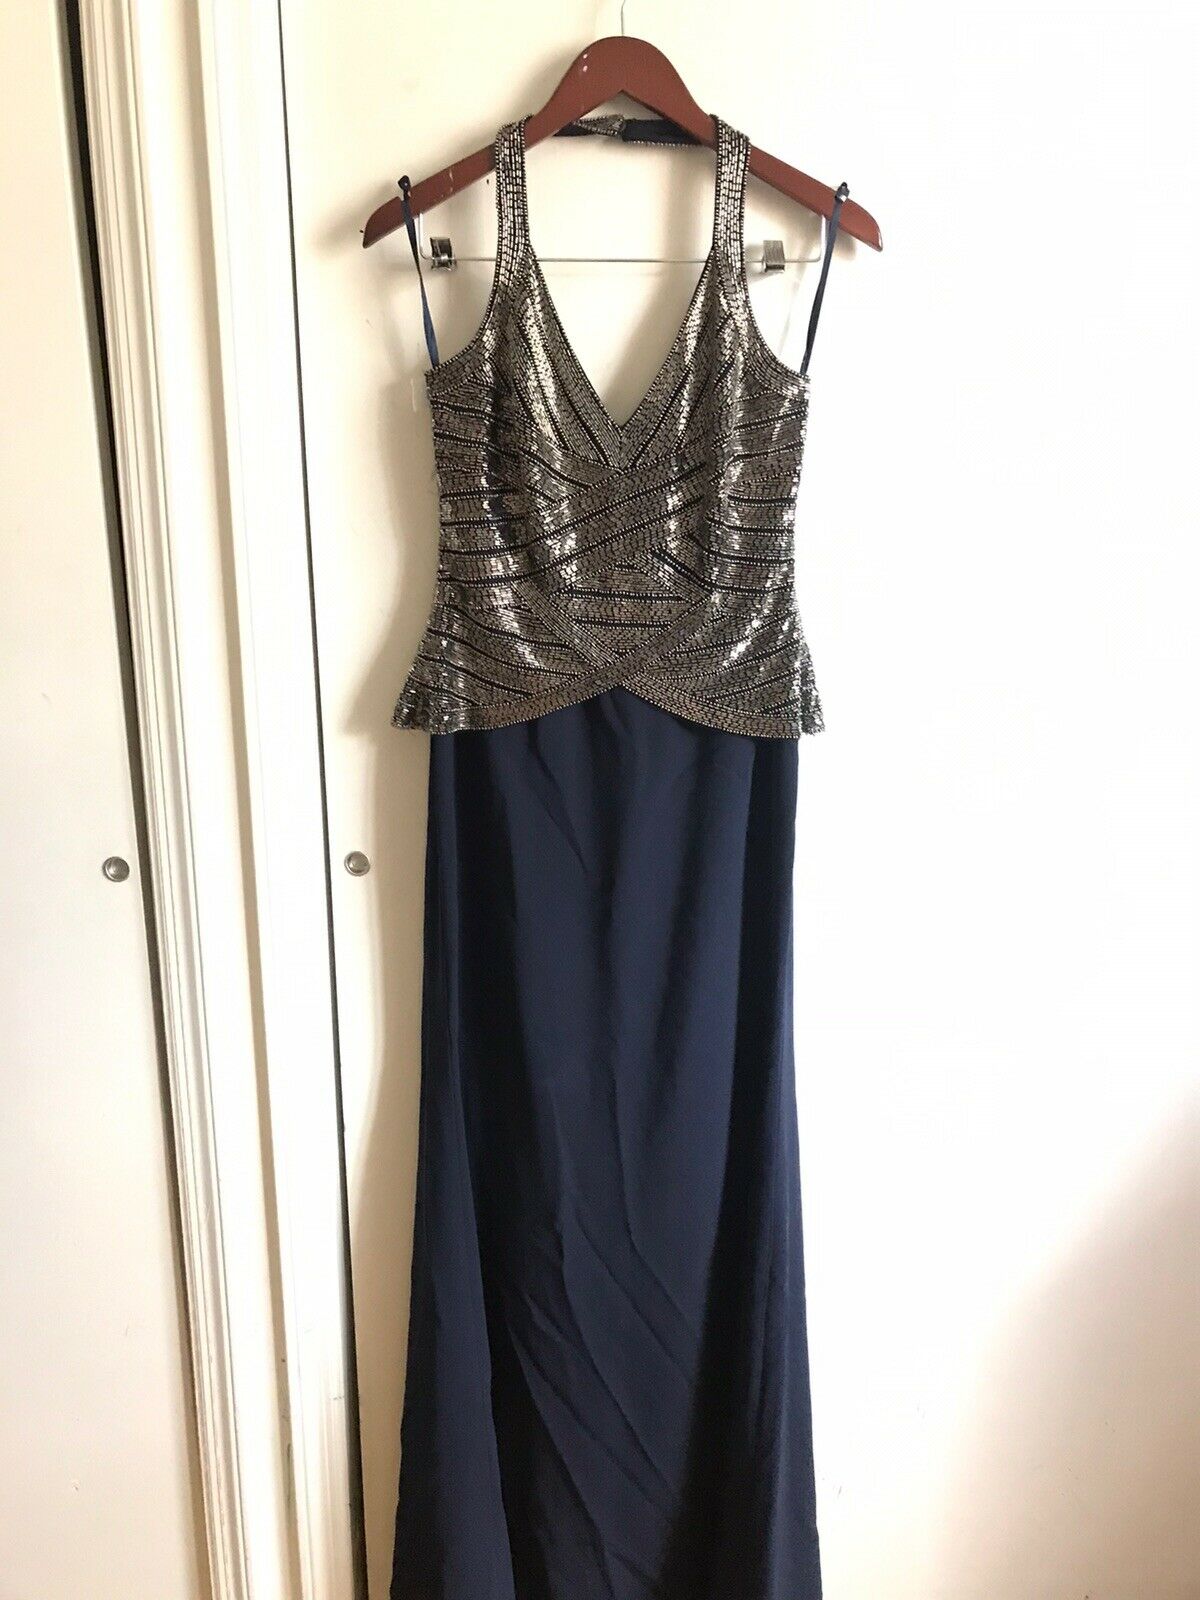 ADRIANNA Papell NWOT Evening Gown 6